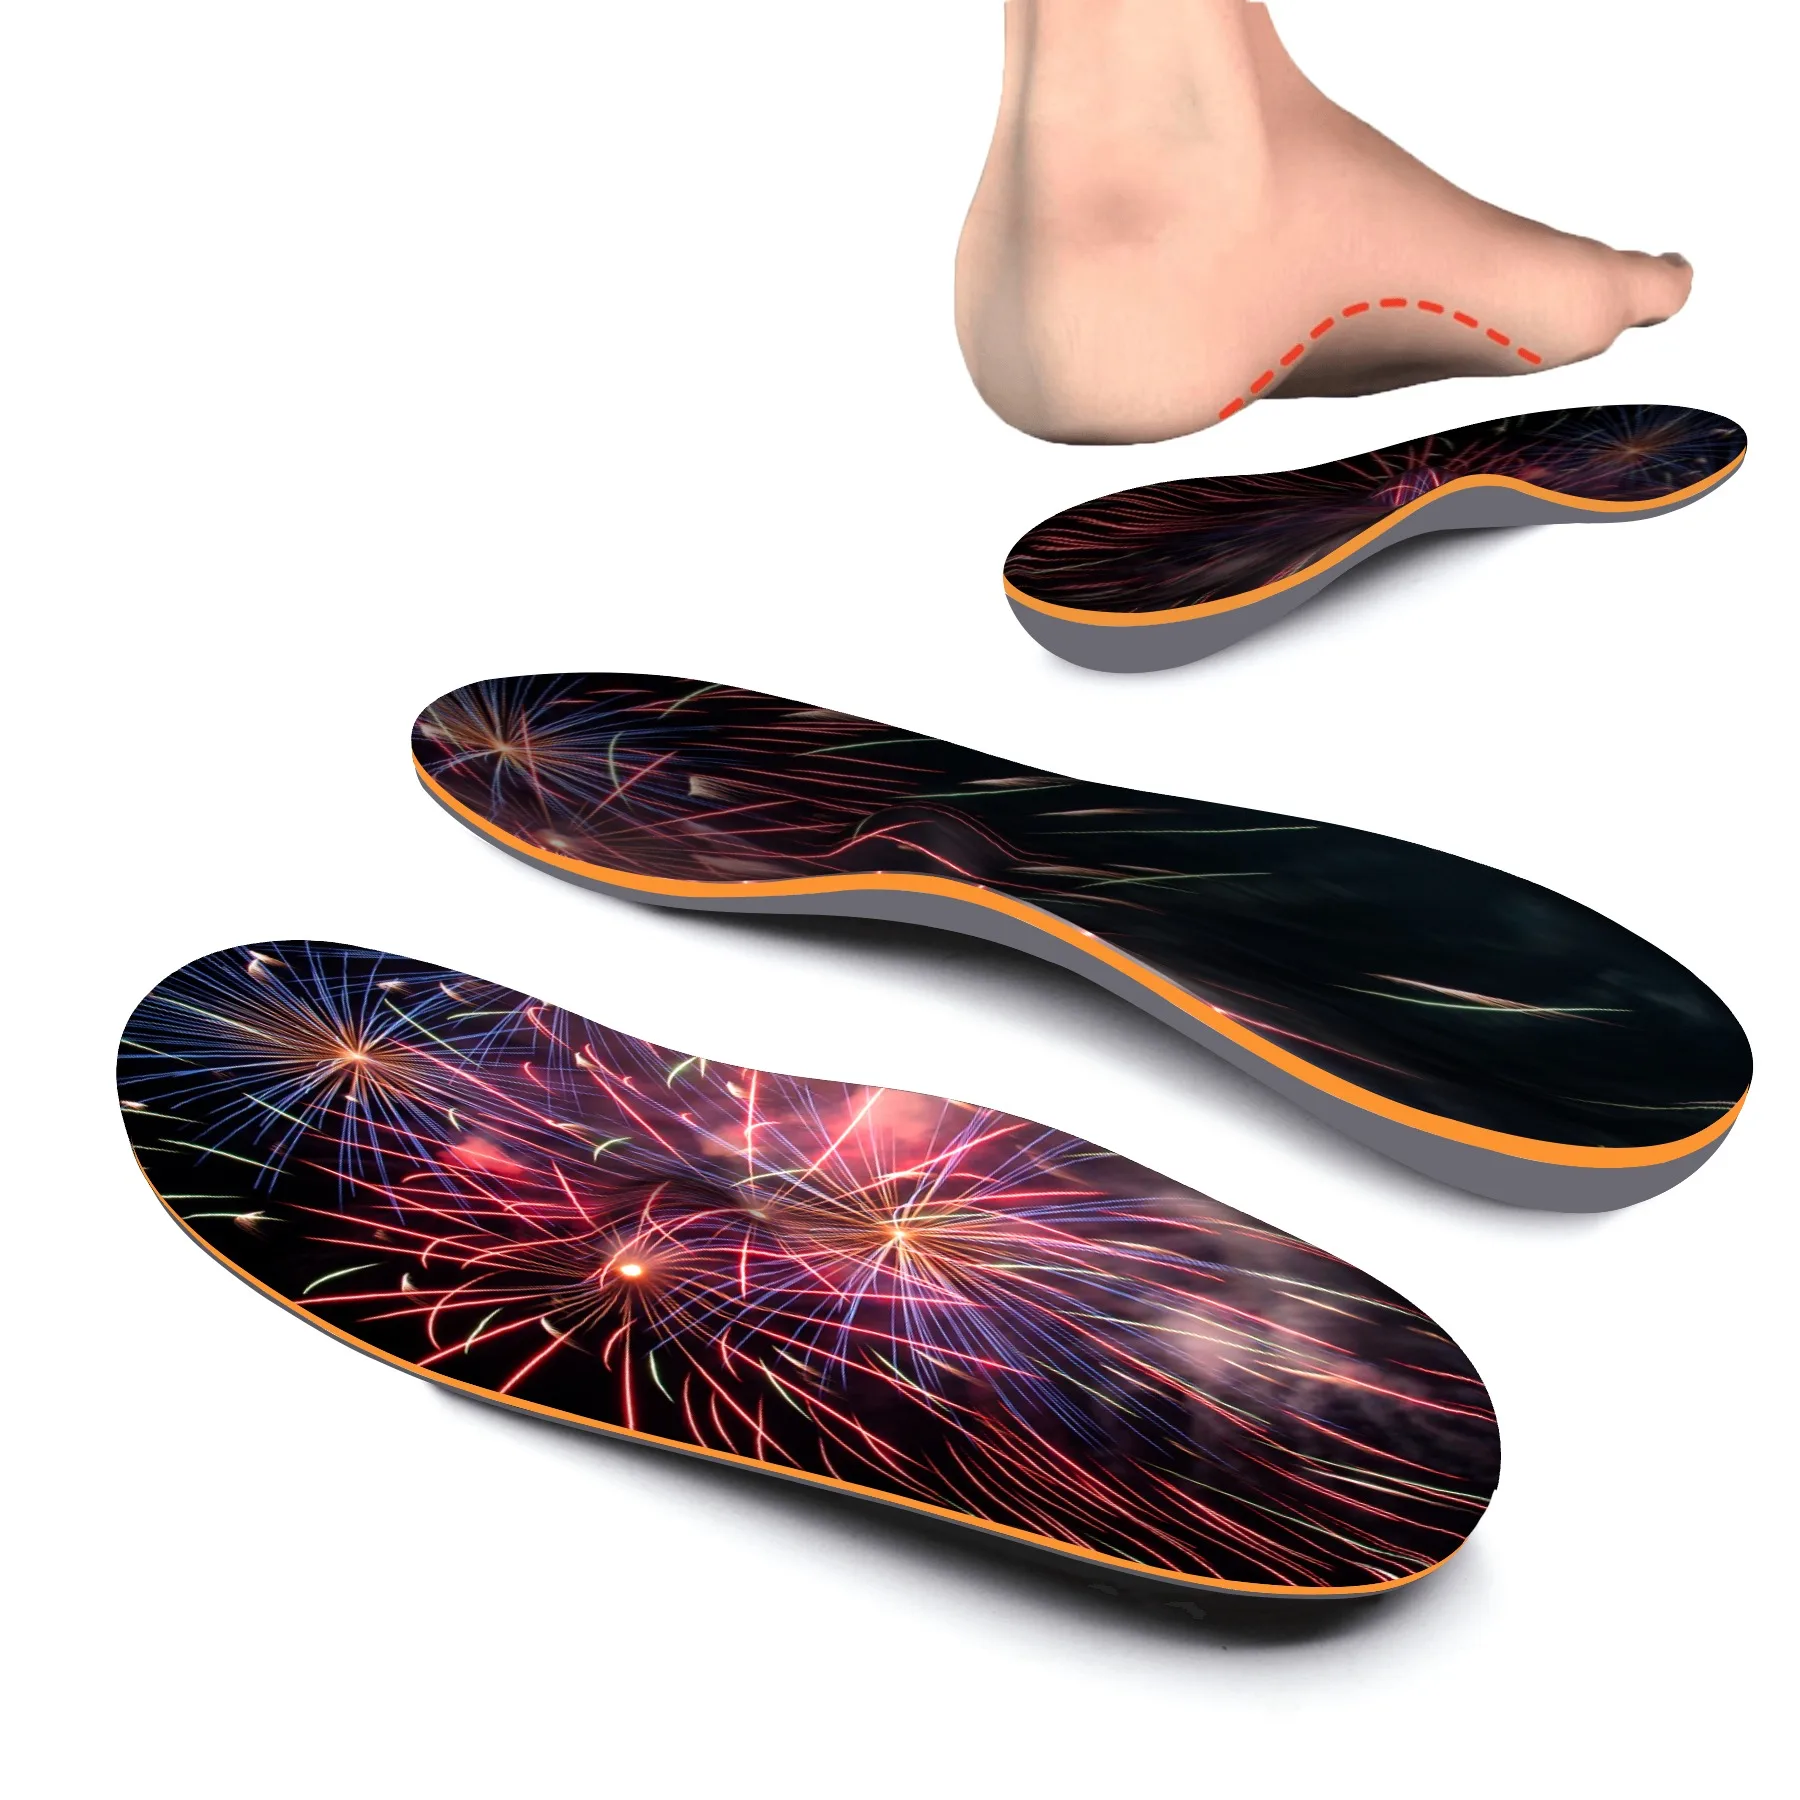 iFitna Insoles Metatarsal Arch Support Pad Orthopedic Sneakers Heel Bone Spurs Plantar Fasciitis Orthosis Cool Color System